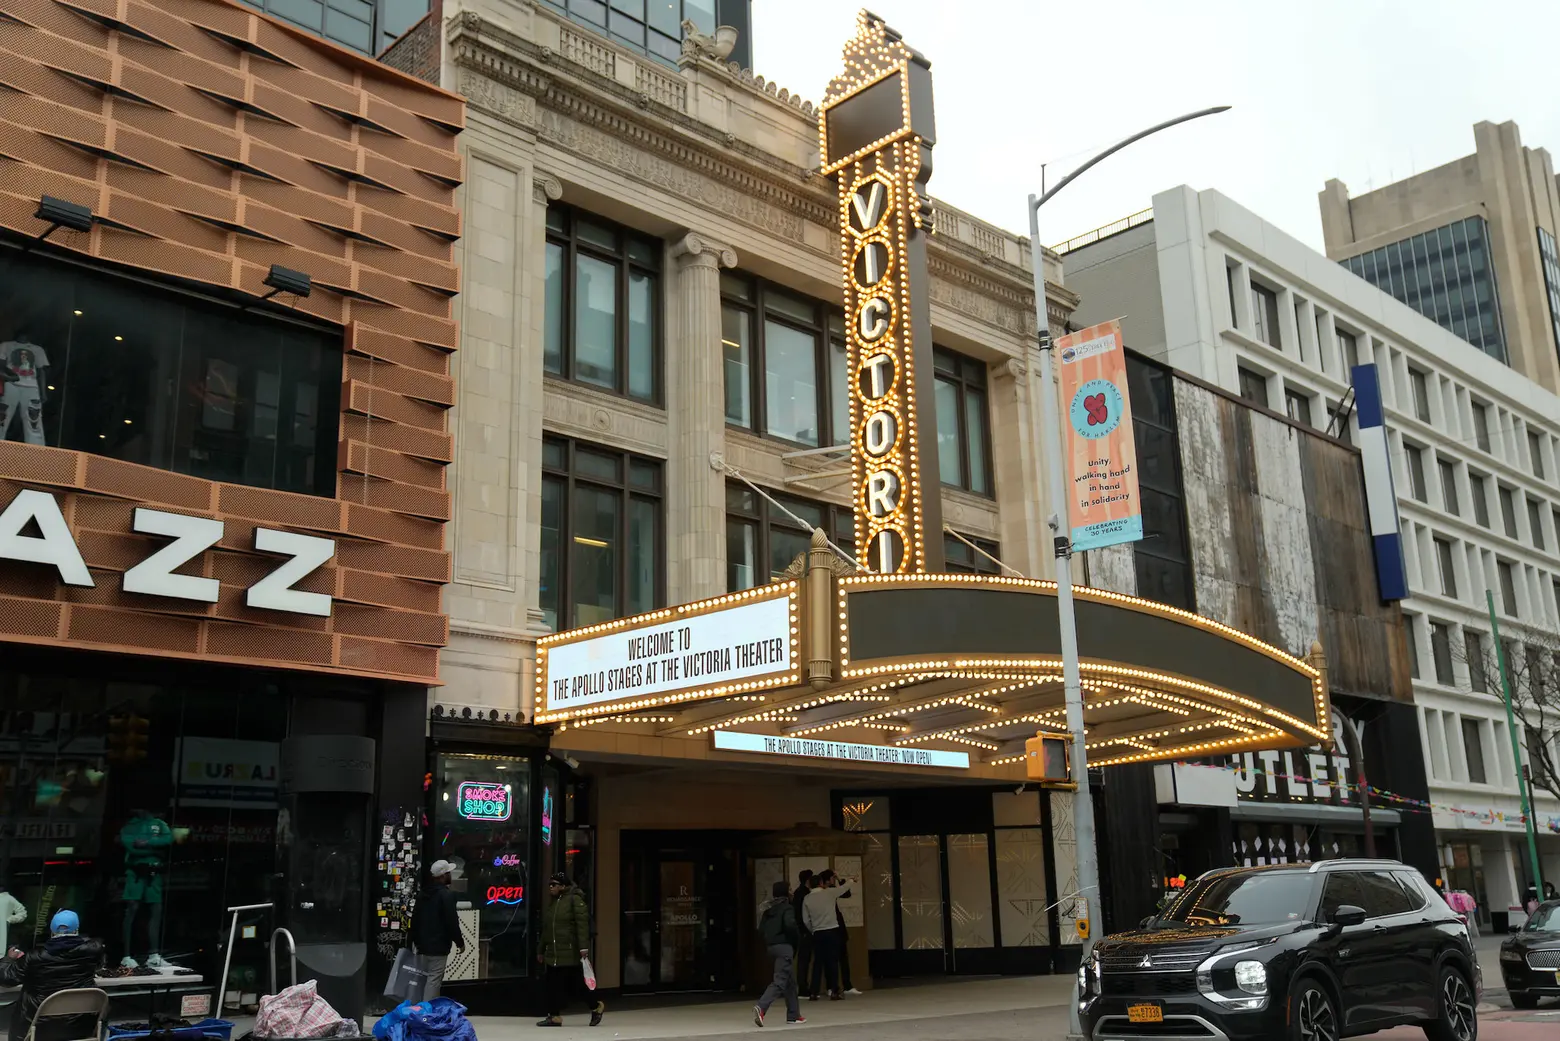 Harlem’s historic Victoria Theater reopens following decade-long restoration